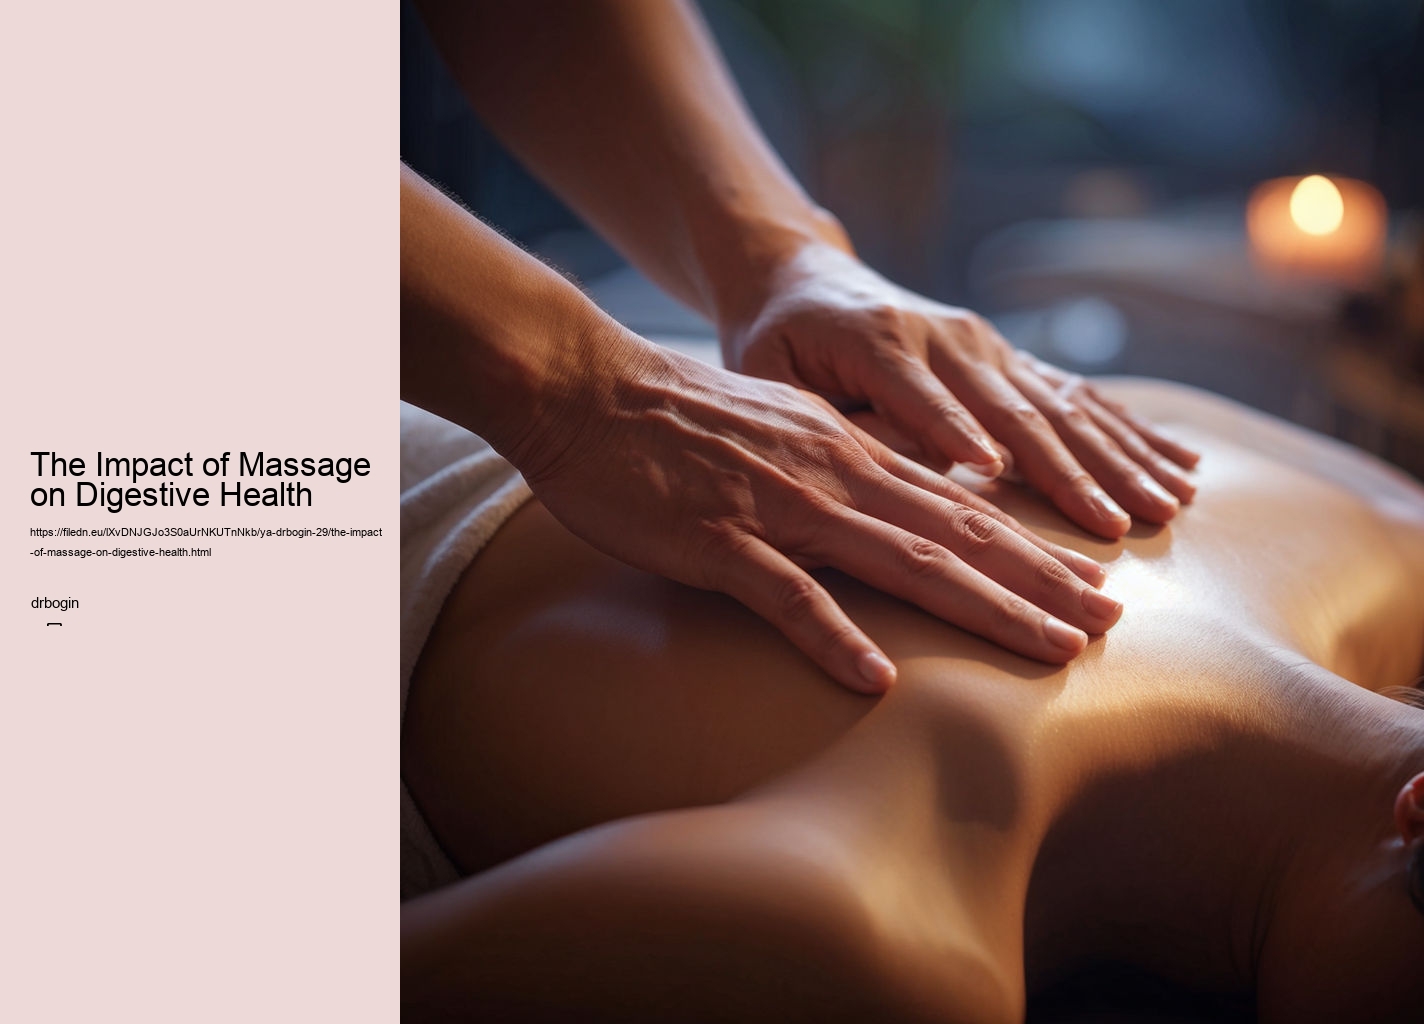 The Impact of Massage on Digestive Health